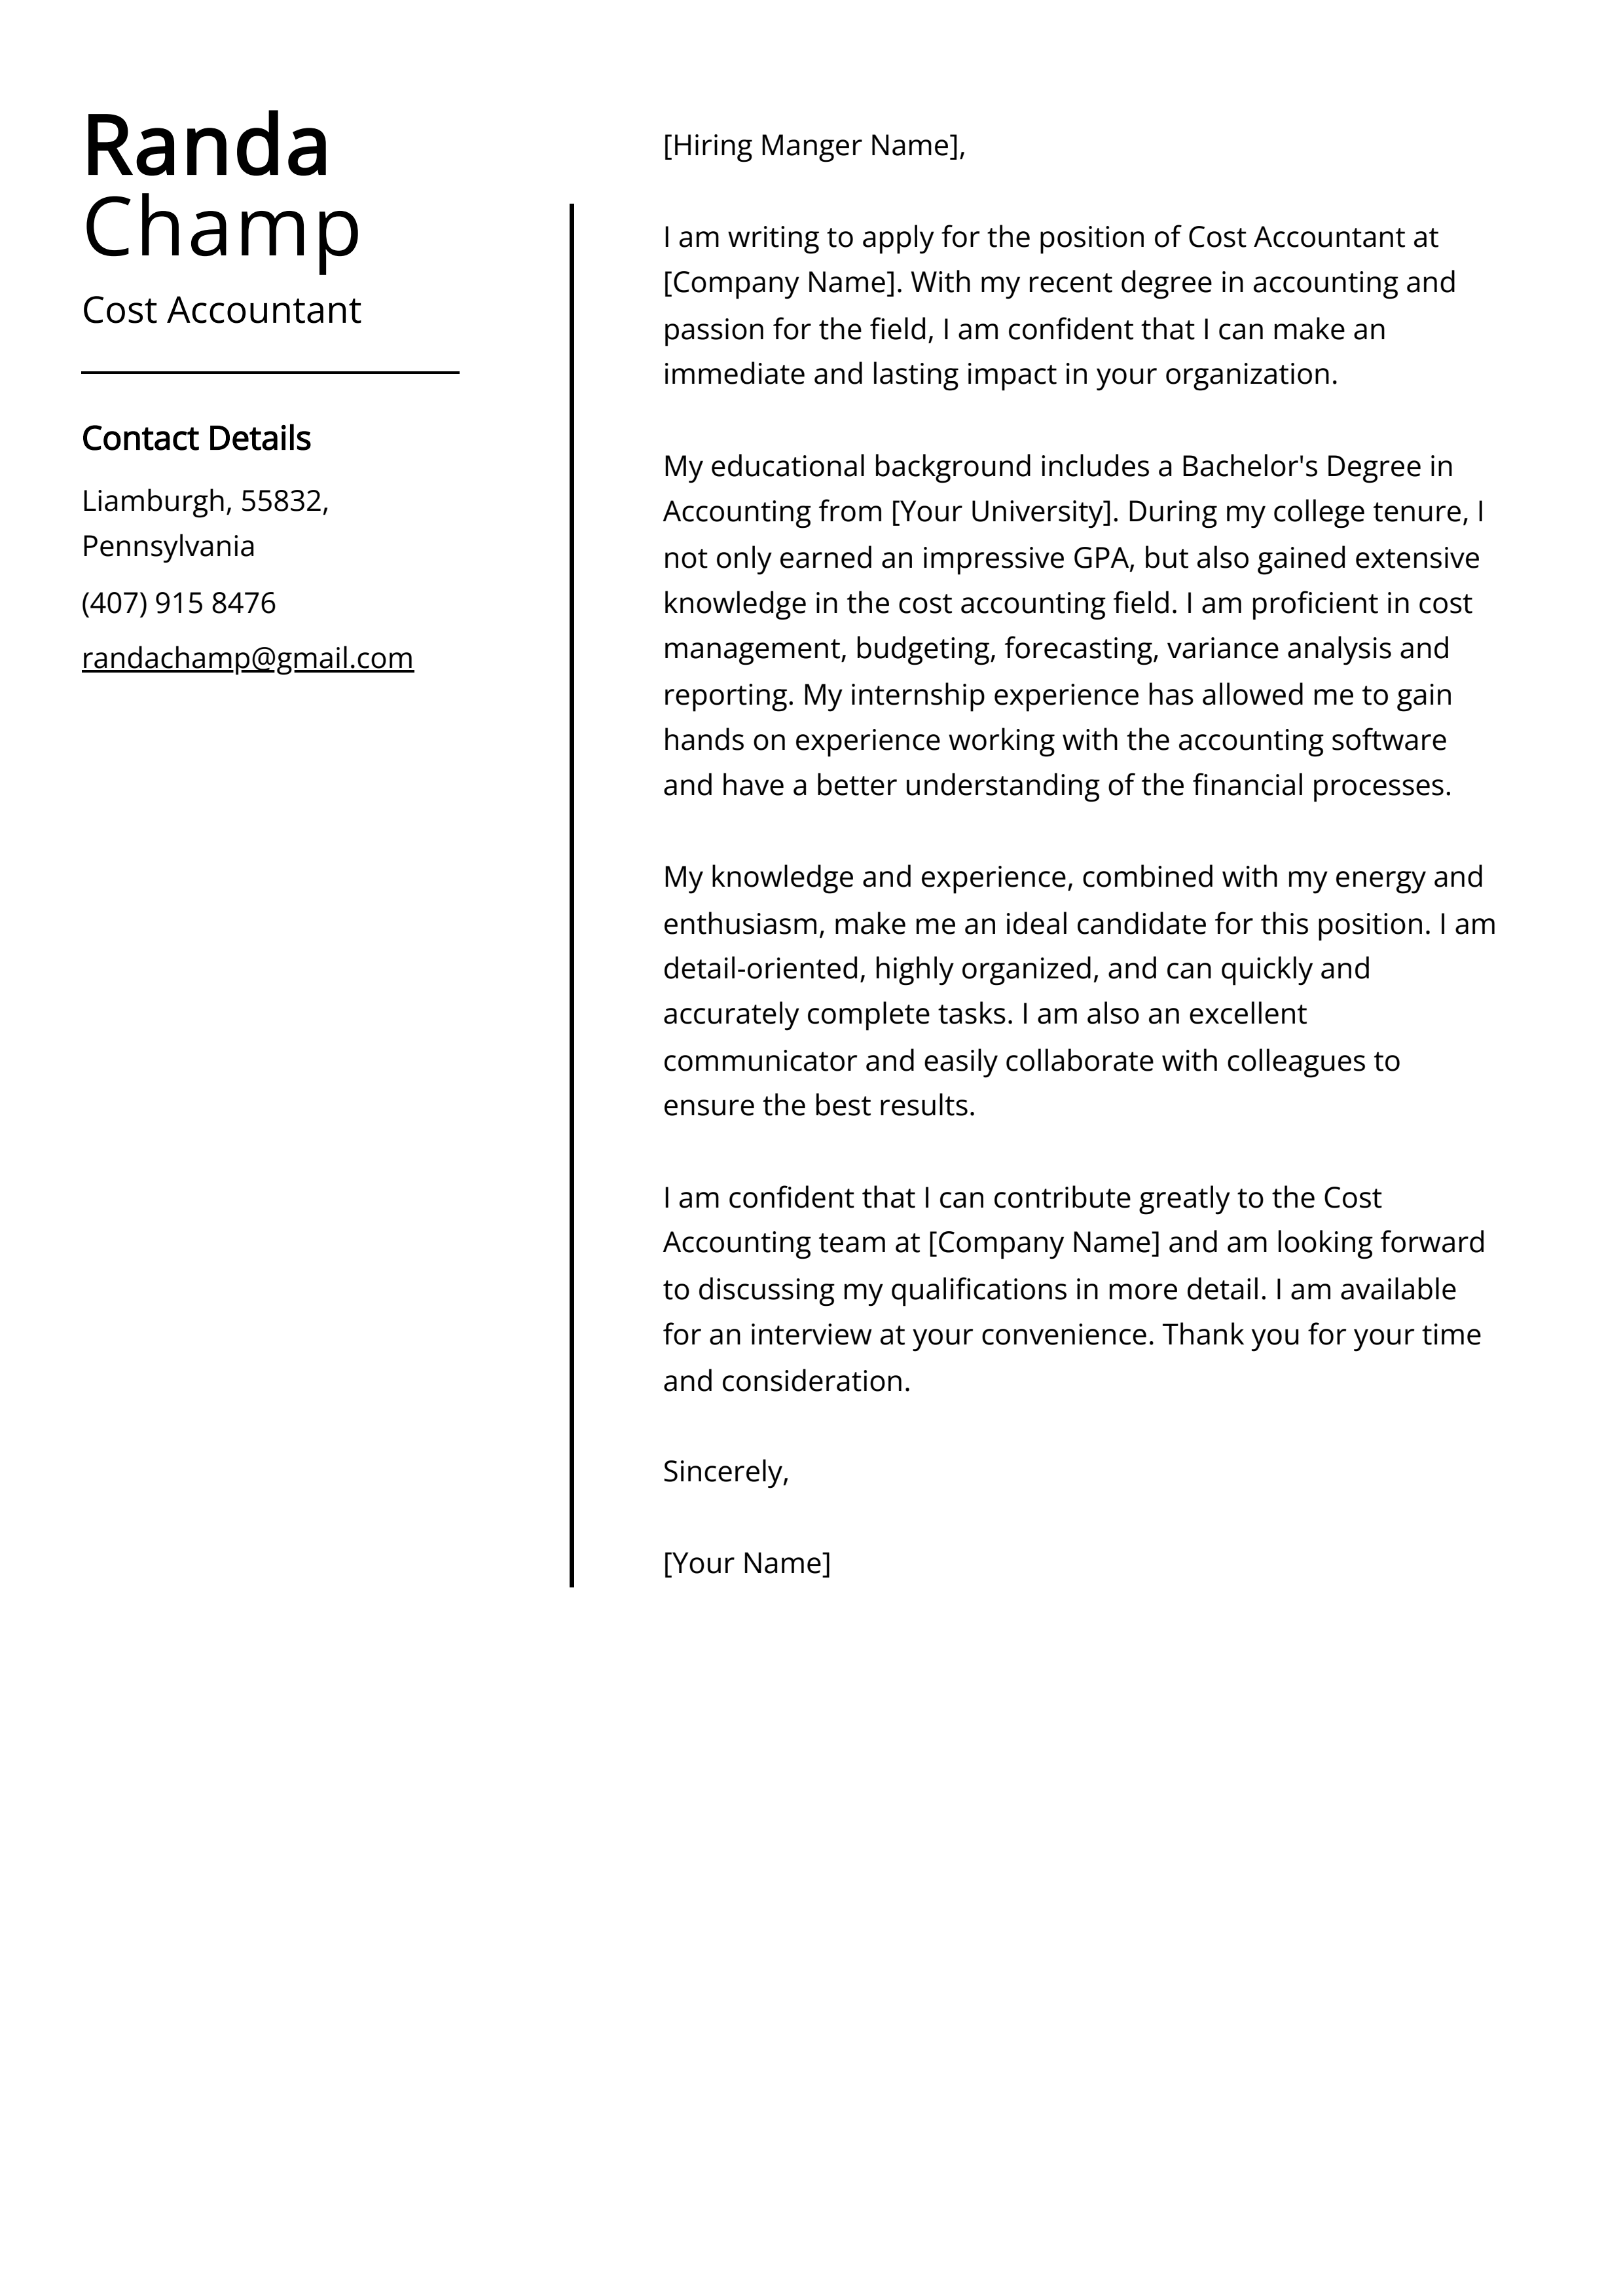 Cost Accountant Cover Letter Example